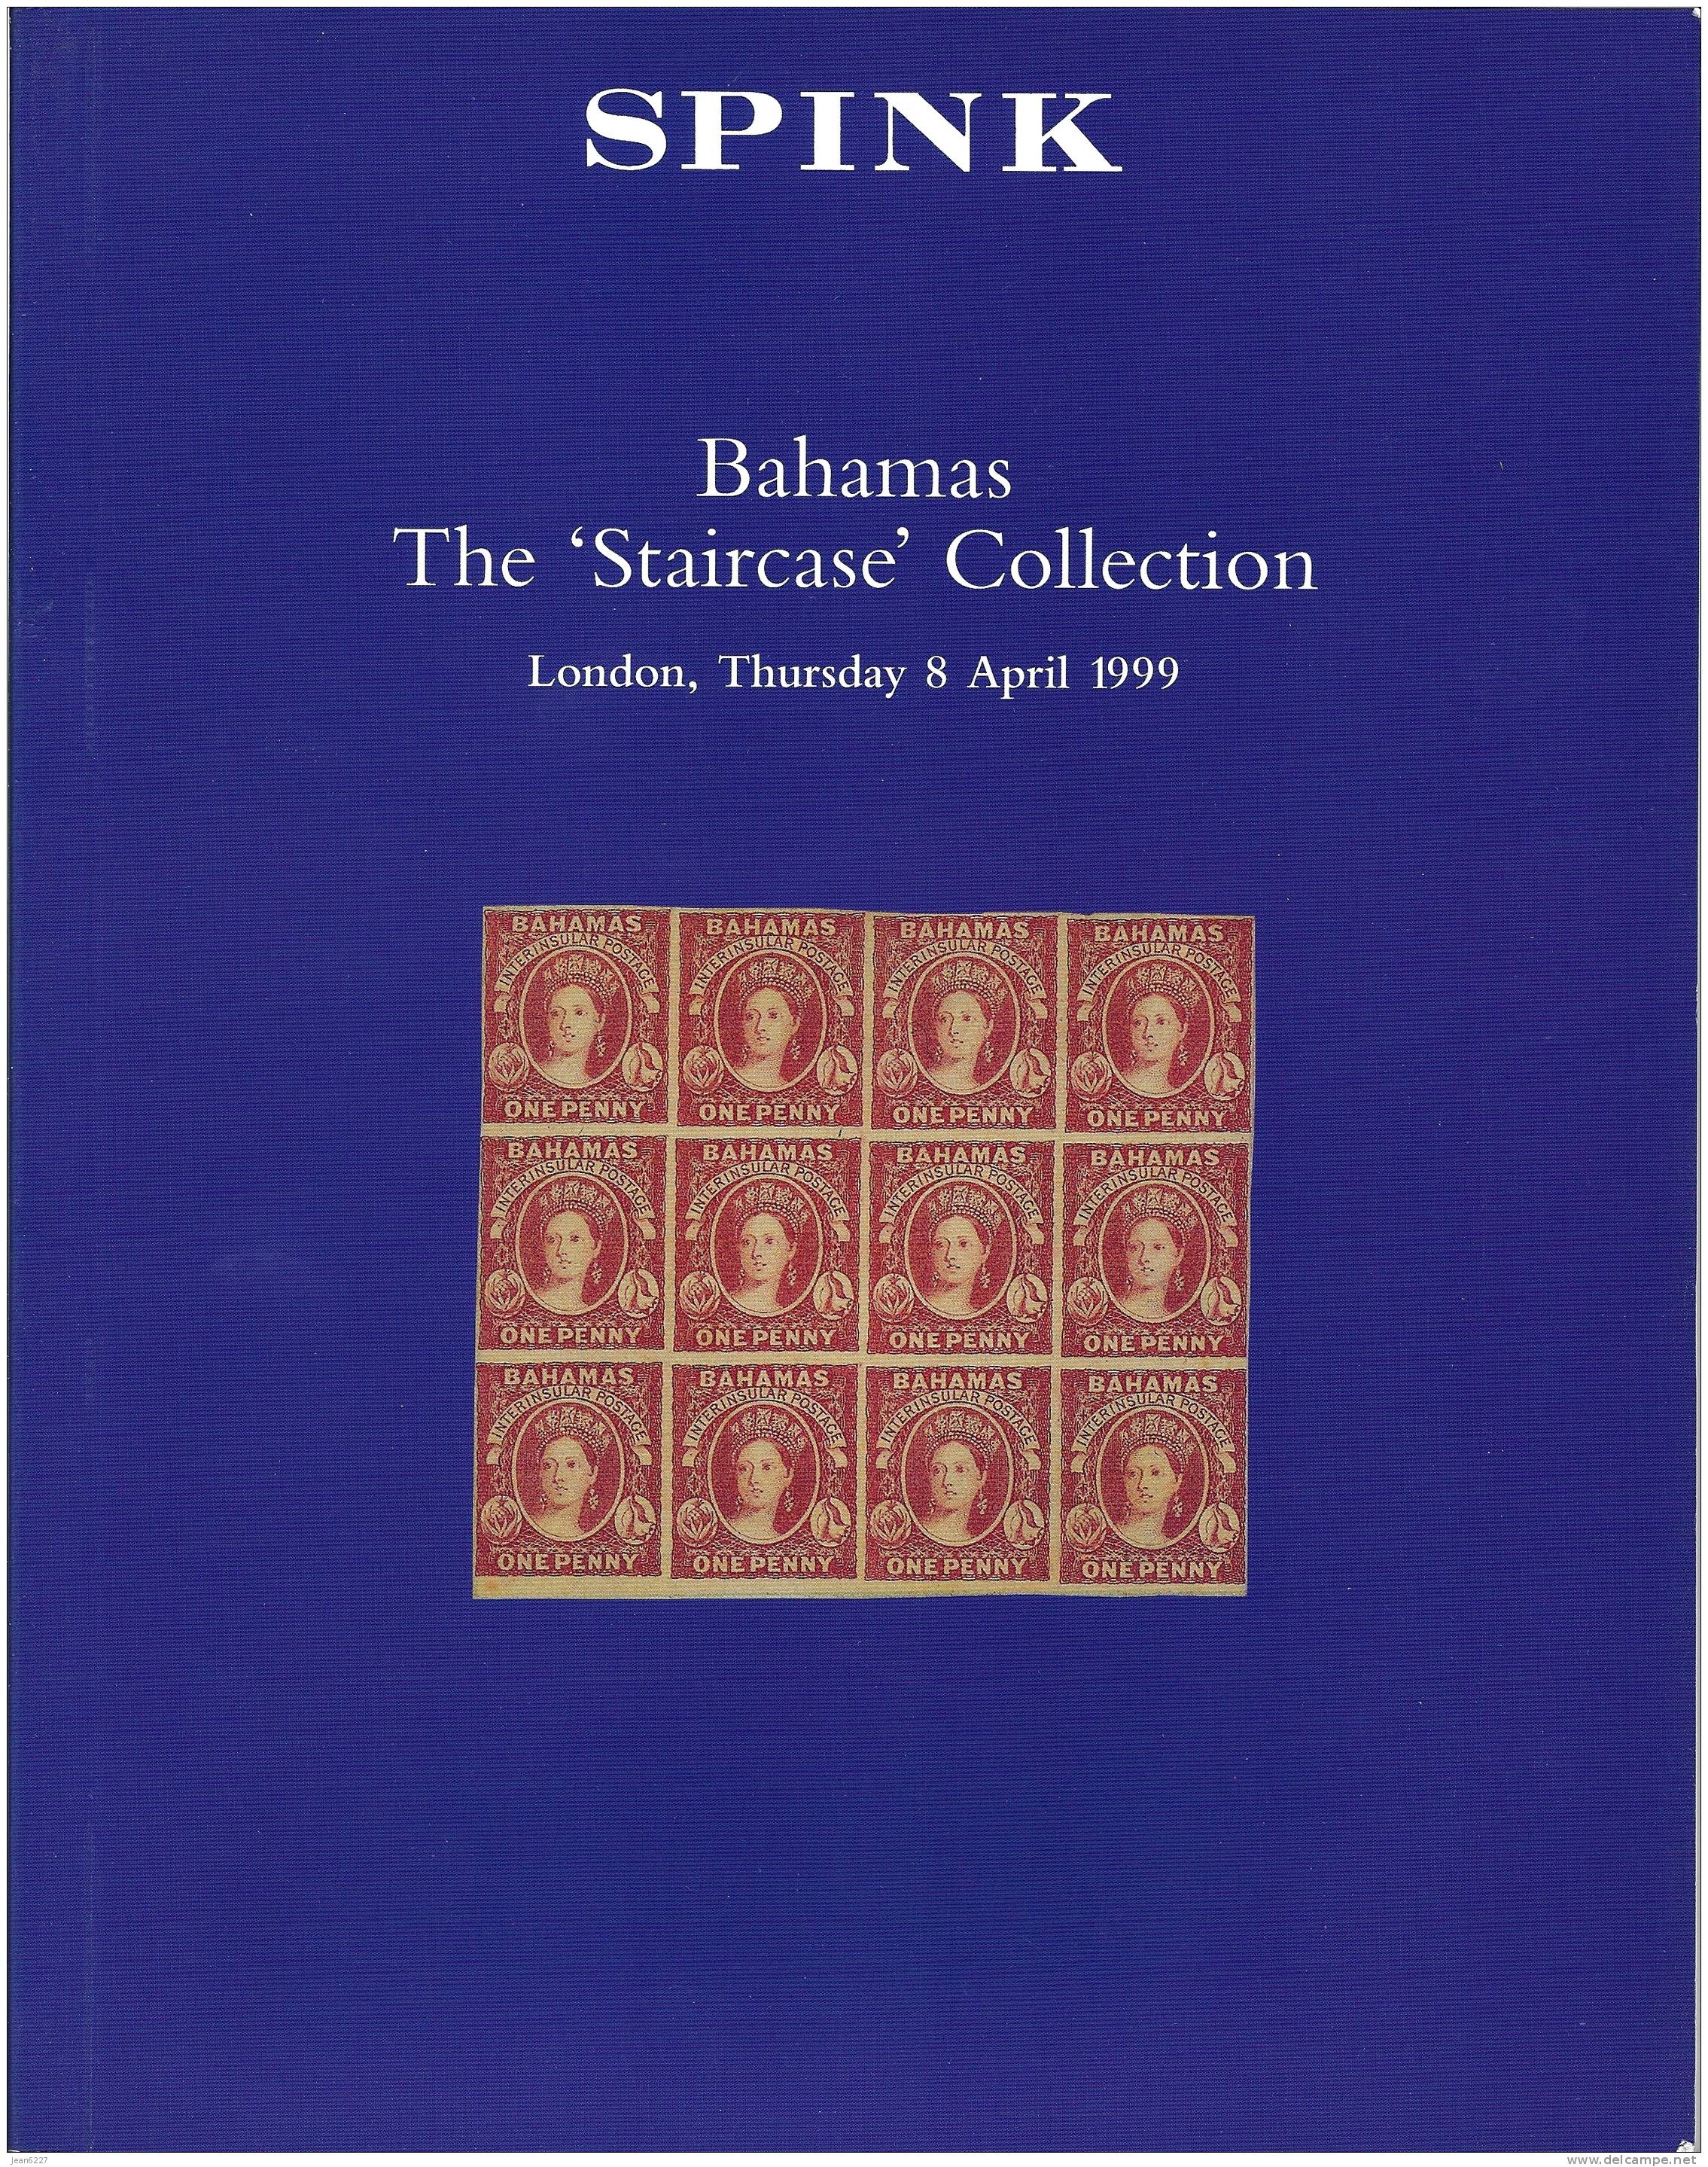 Spink Auctions - Bahamas - Catalogues For Auction Houses